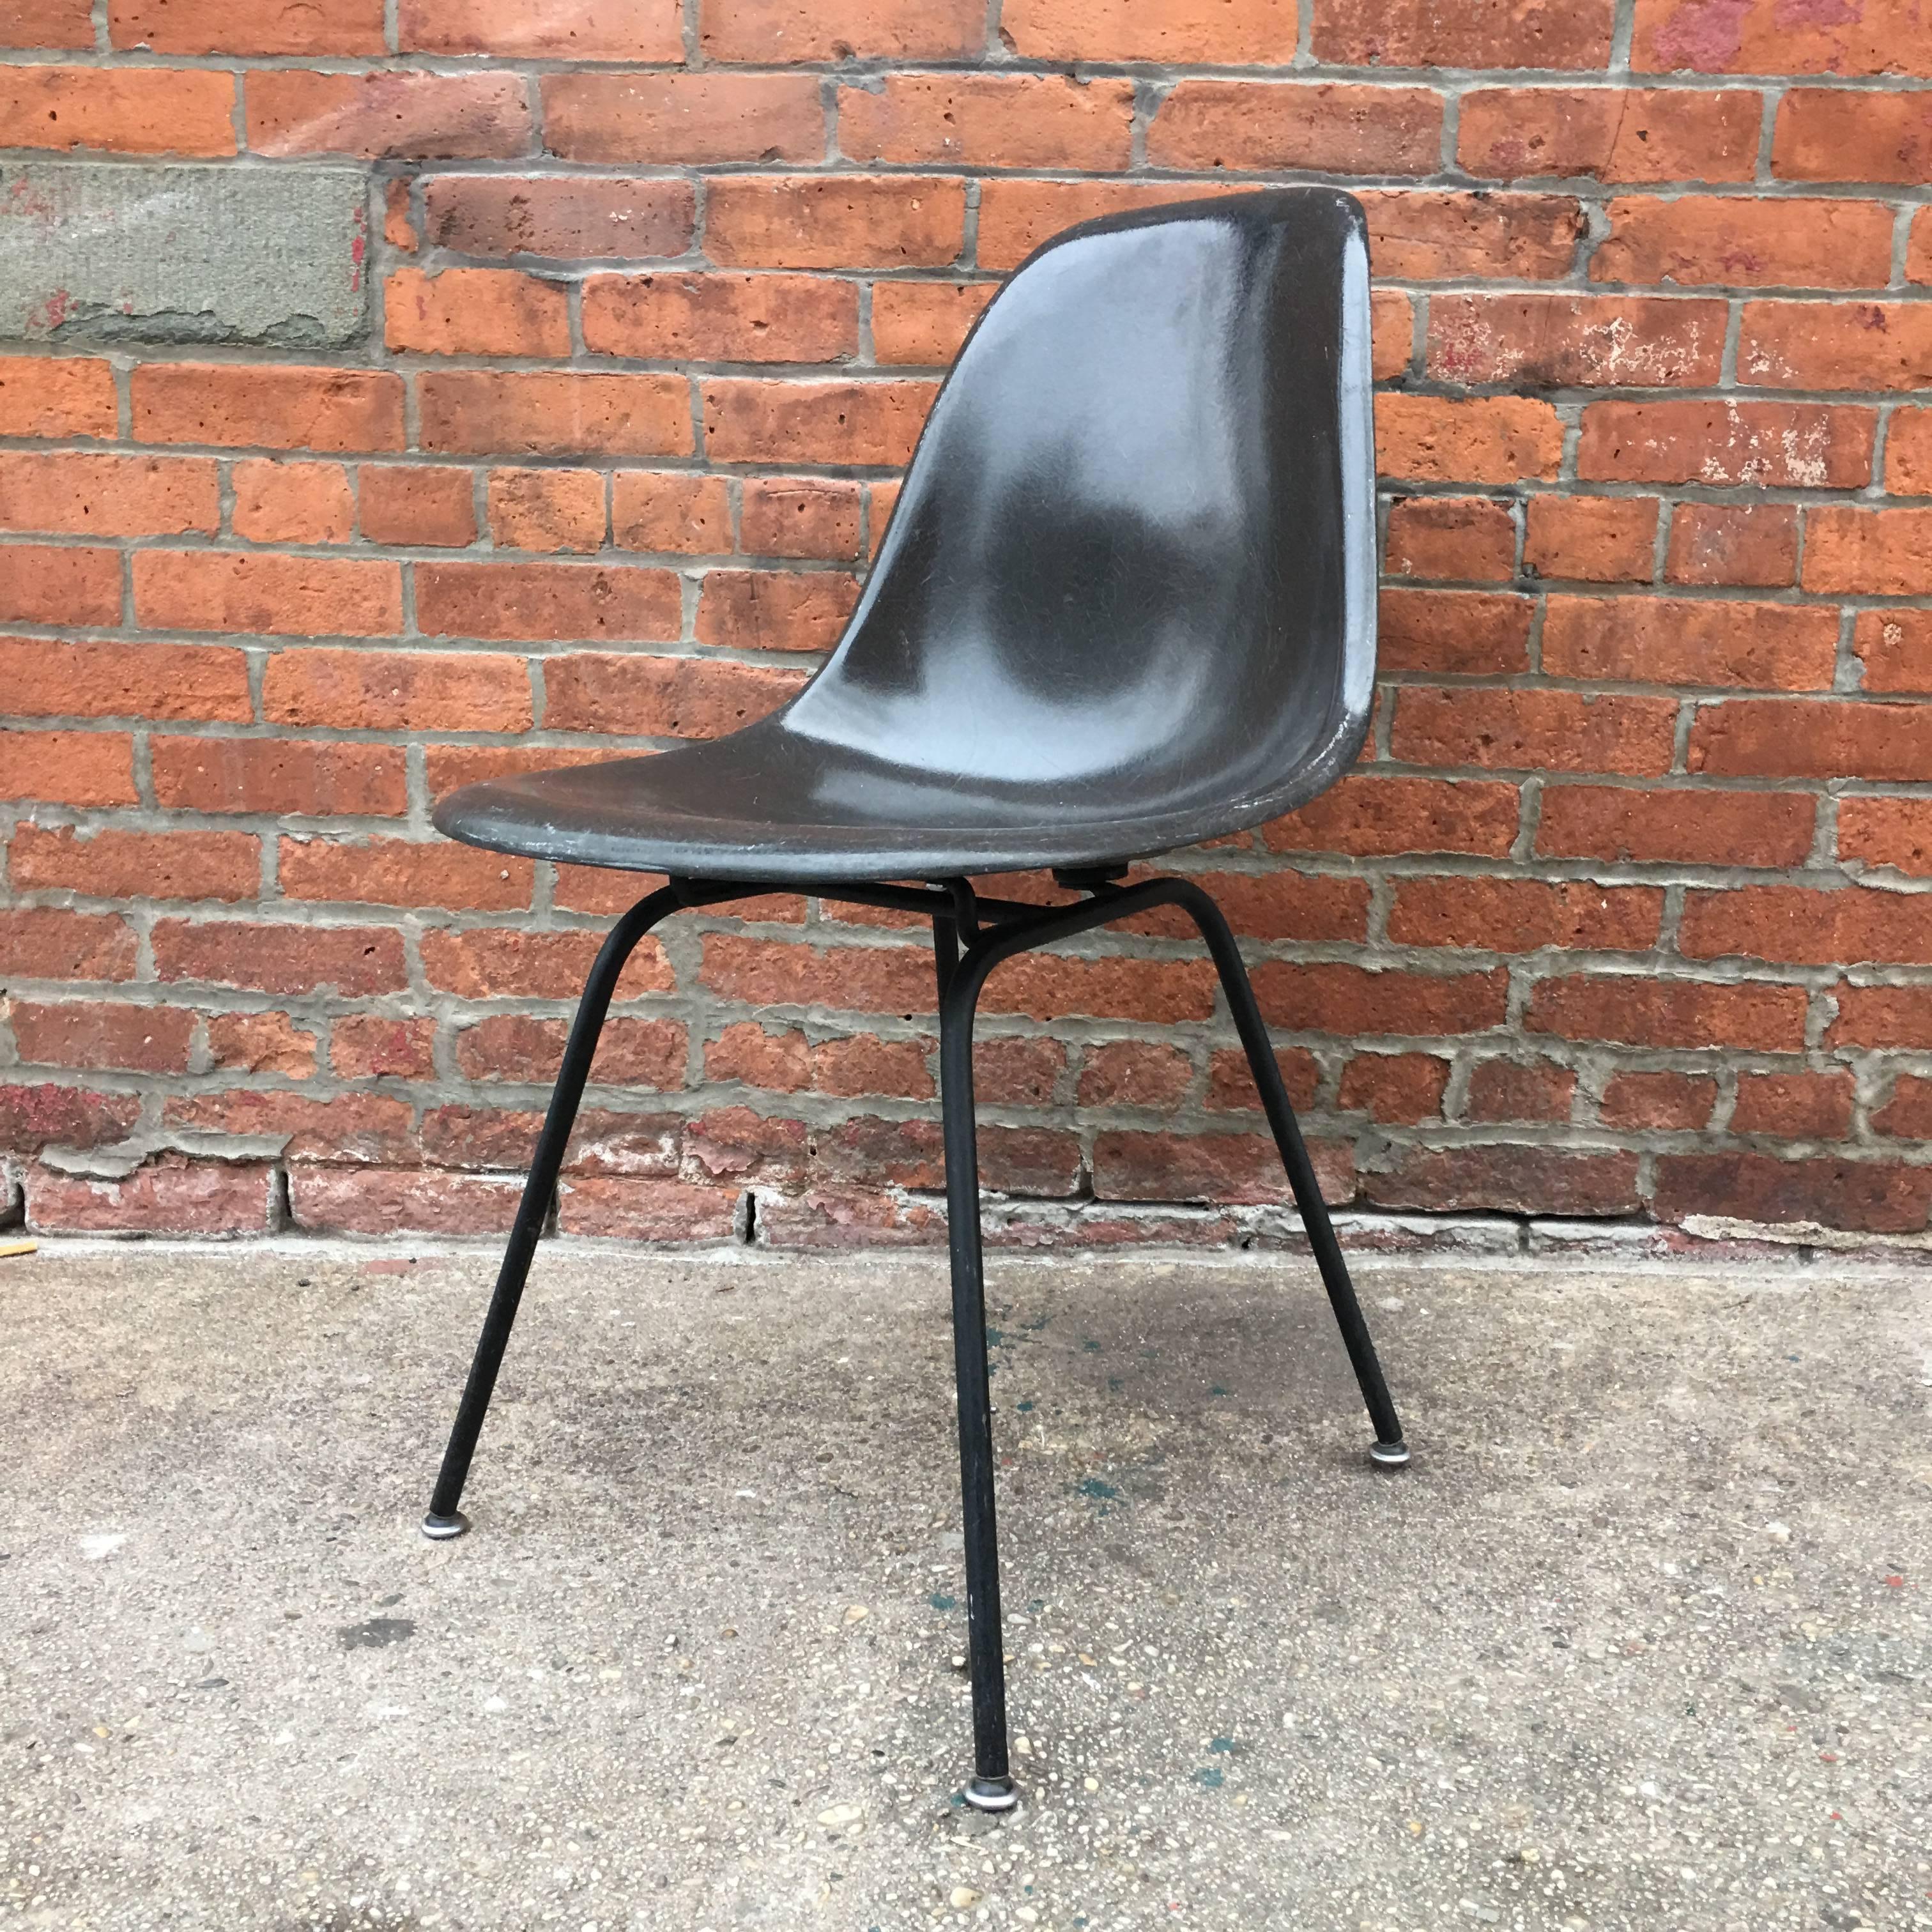 Ten Herman Miller Eames DSX dining chairs in rare black. Black was a special order color and was produced in limited quantities. Also available in zinc-plated original Herman Miller bases. Note that the glides on these bases will be white not as